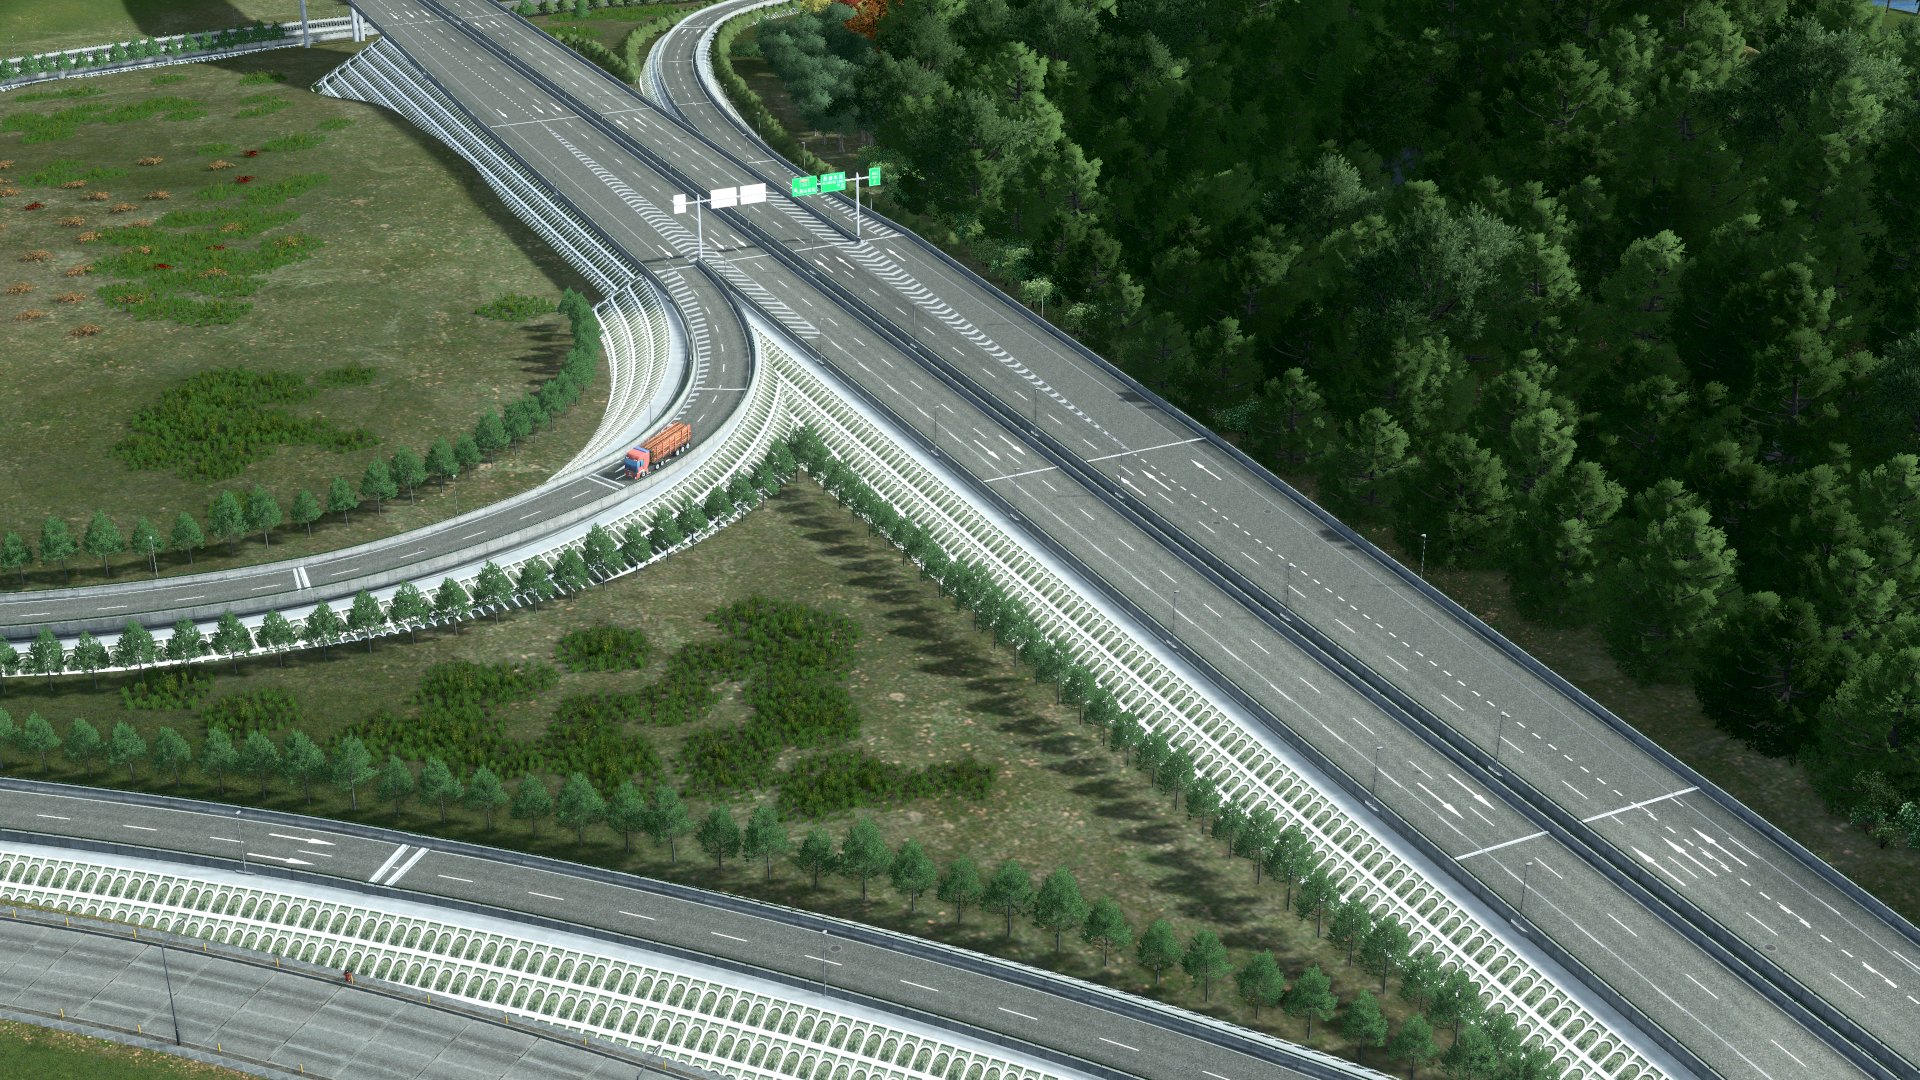 Cities Skylines 西伯利亚猫 Created This Amazing Interchange With Csur The New Community Made Tool That S Been Blowing Up Recently Truly A Masterpiece Download It Here T Co Tbgms0xscd T Co Qirlna6kmd